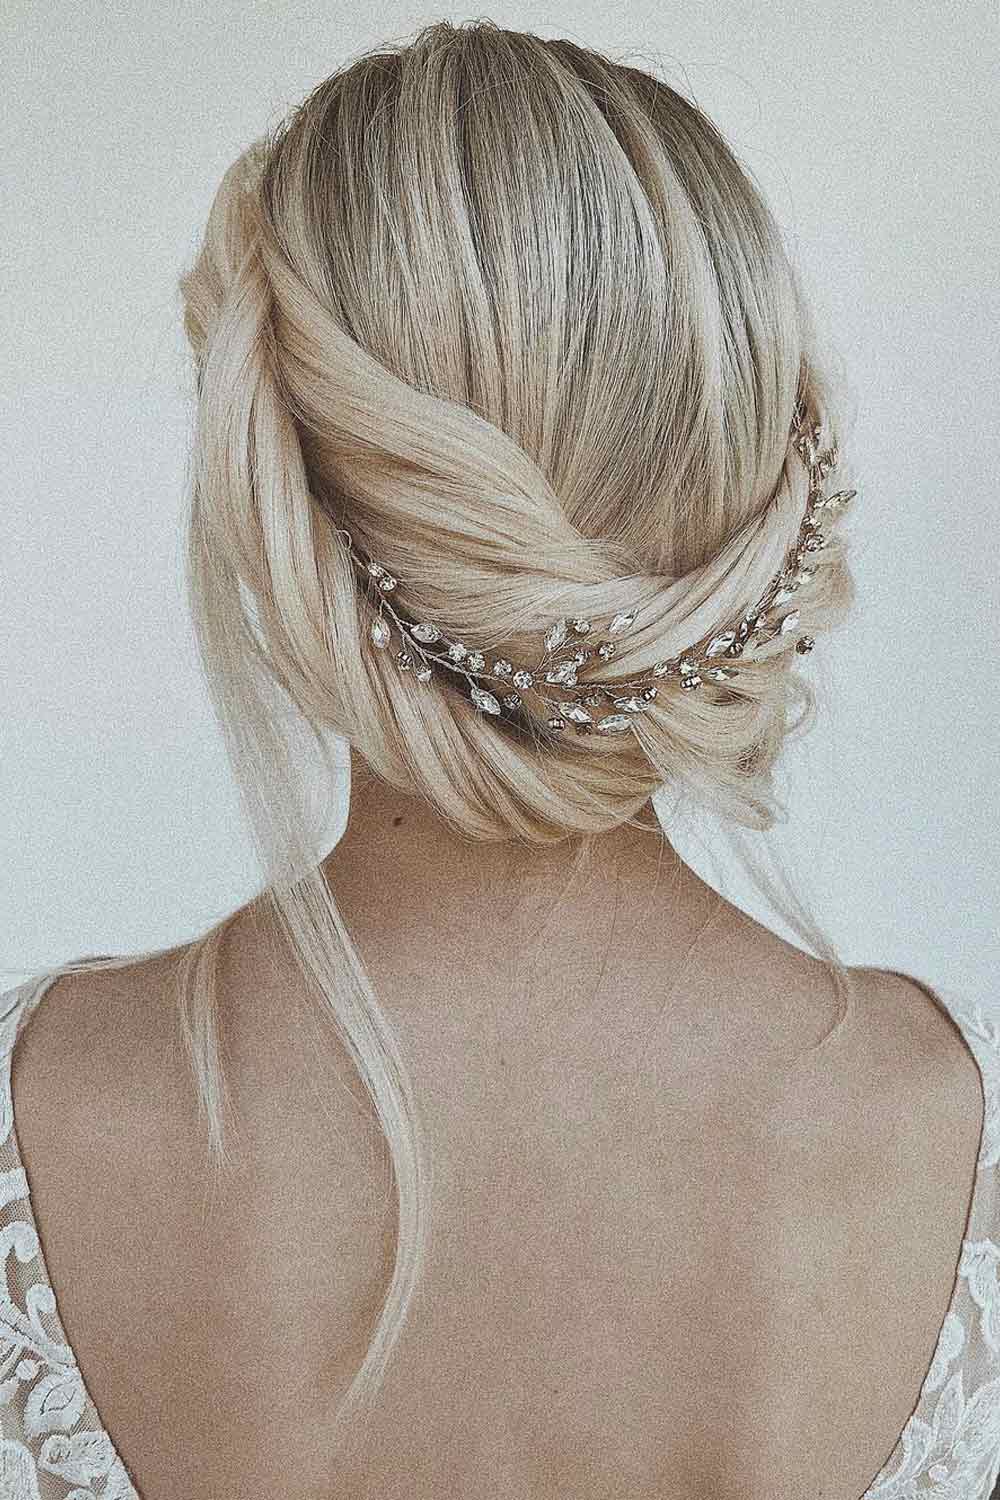 Updo with Fishtail Braid and Accessory